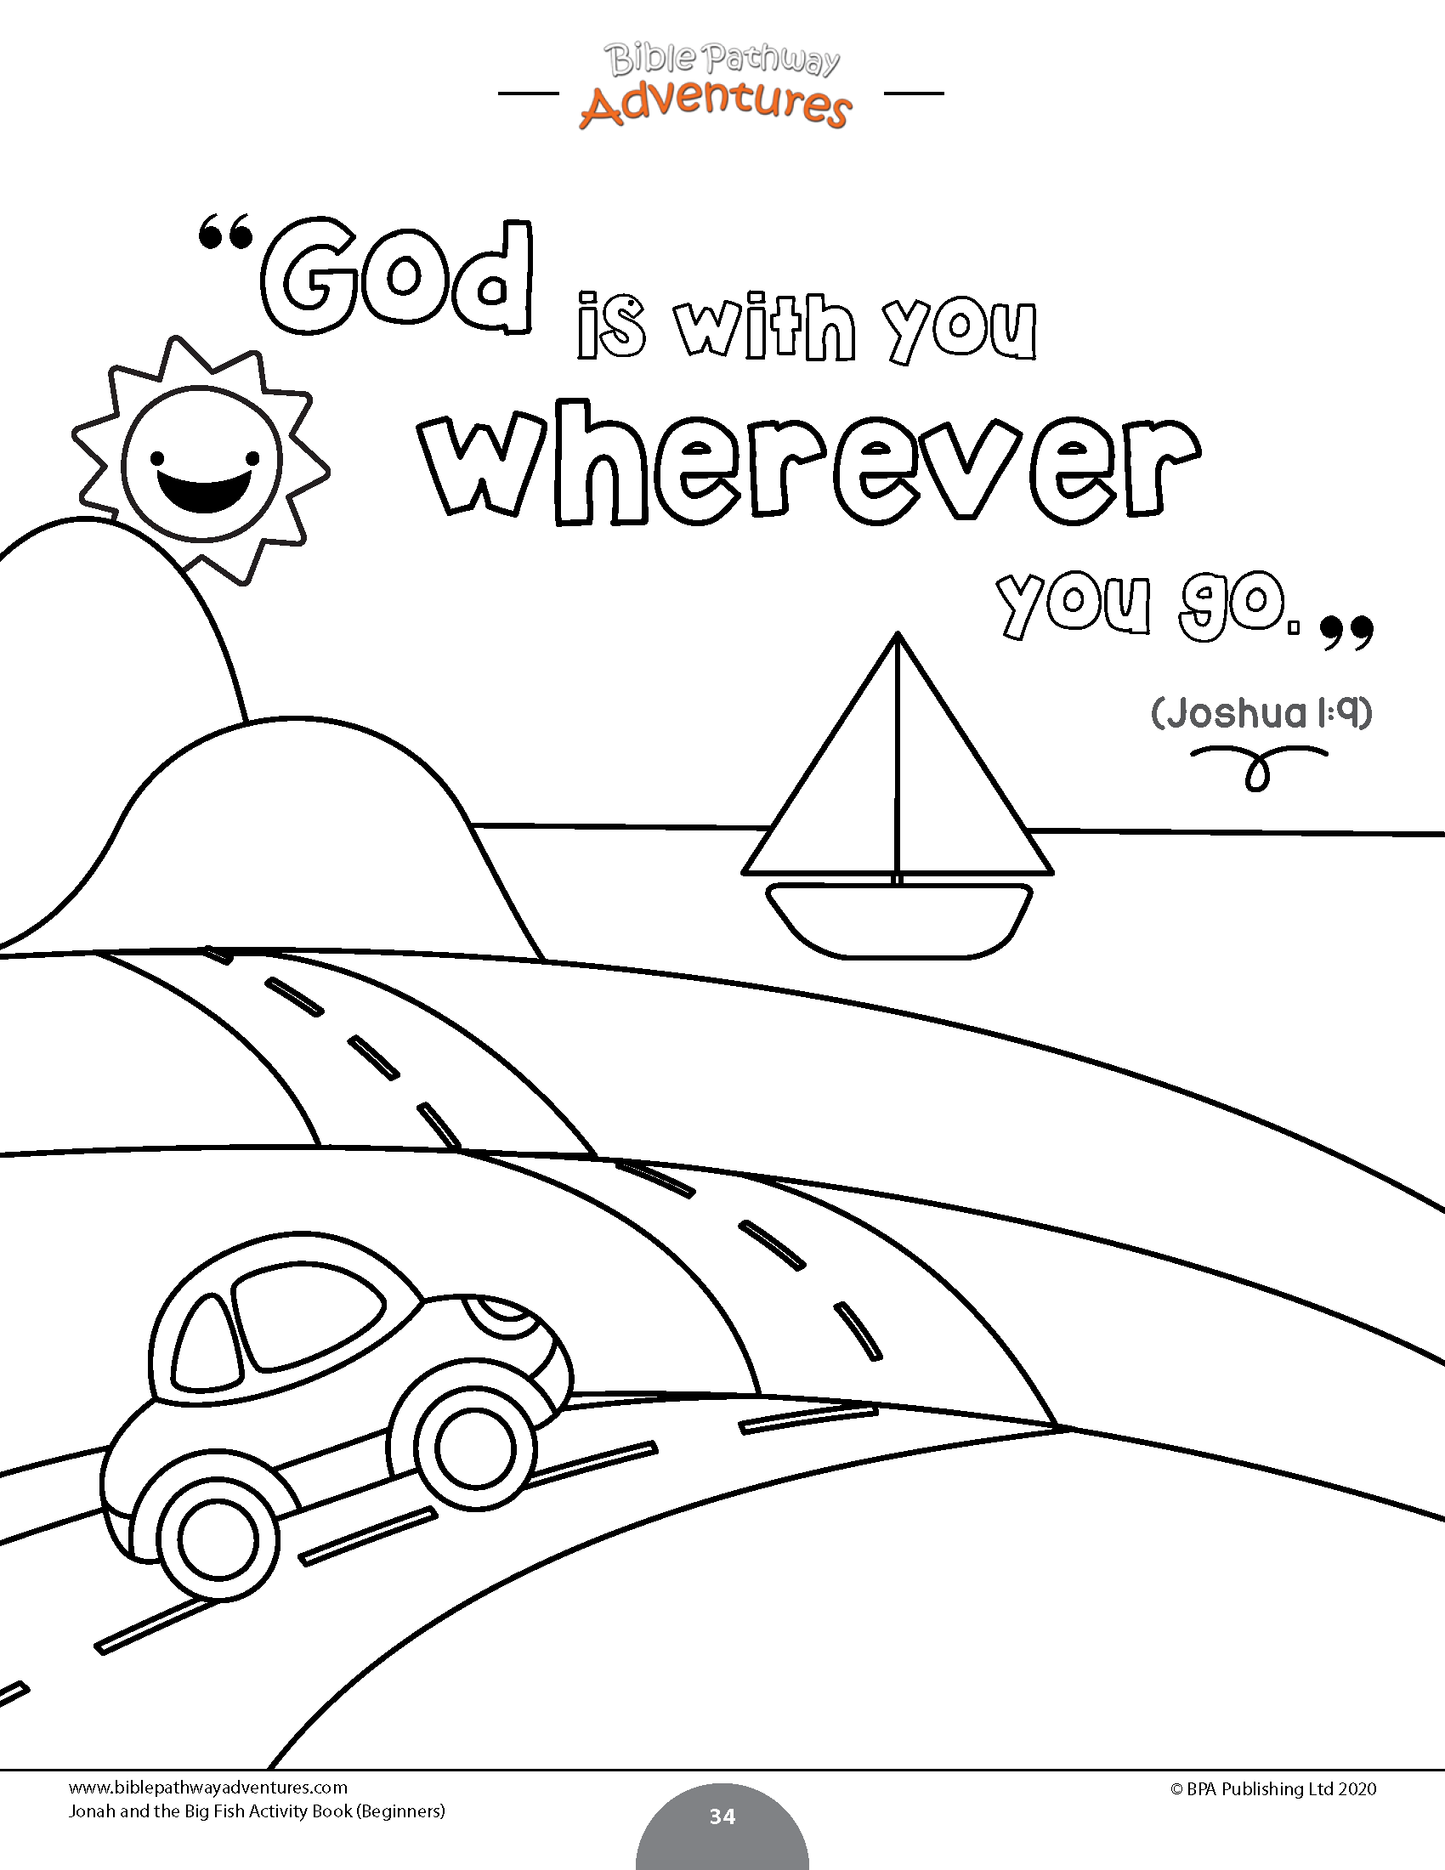 Jonah and the Big Fish Activity Book for Beginners (PDF)